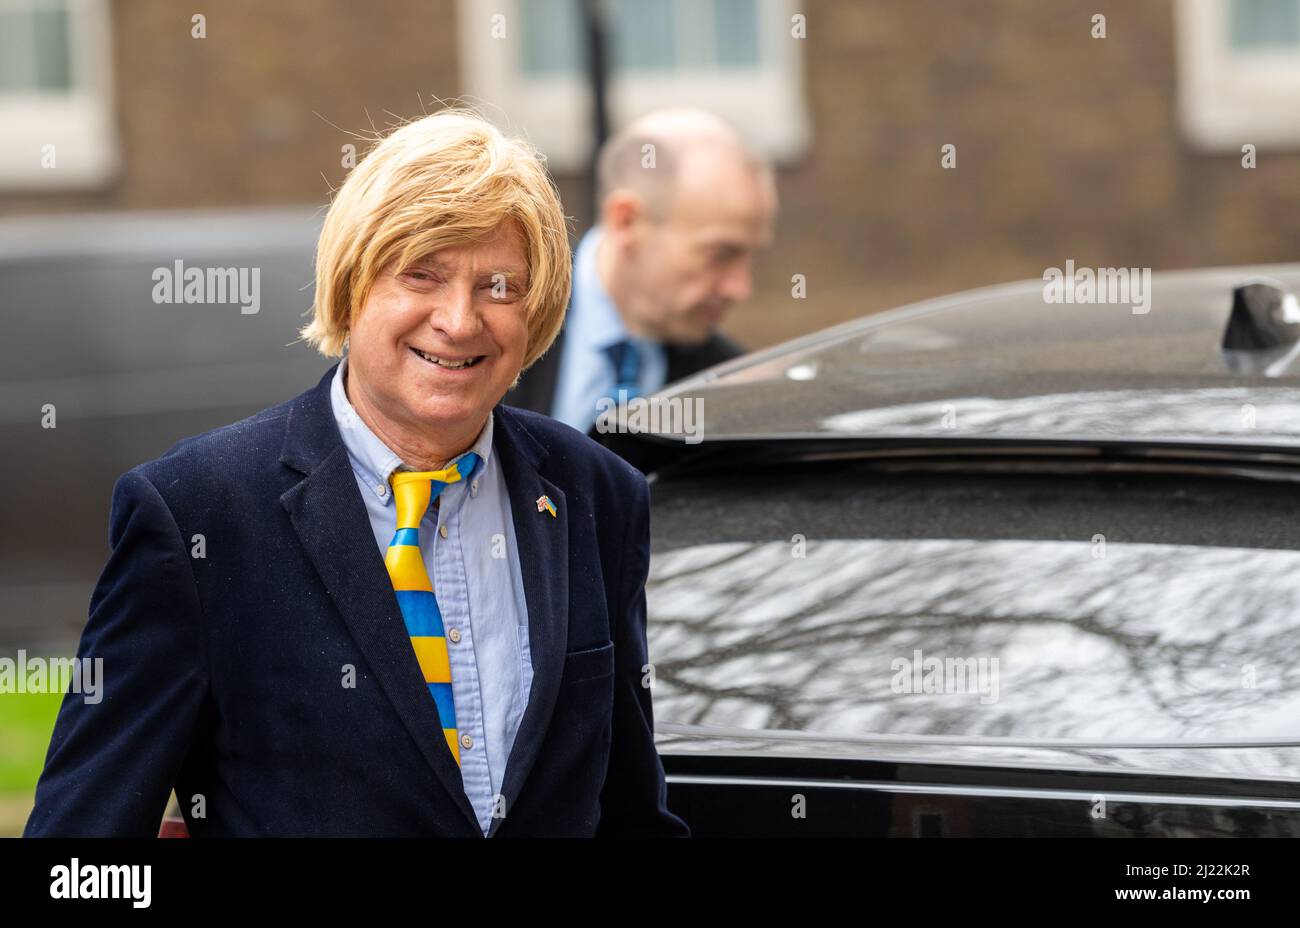 London, UK. 29th Mar, 2022. Senior Conservative MP's in Downing Street, London Pictured Michael Fabricant MP for Litchfield Credit: Ian Davidson/Alamy Live News Stock Photo